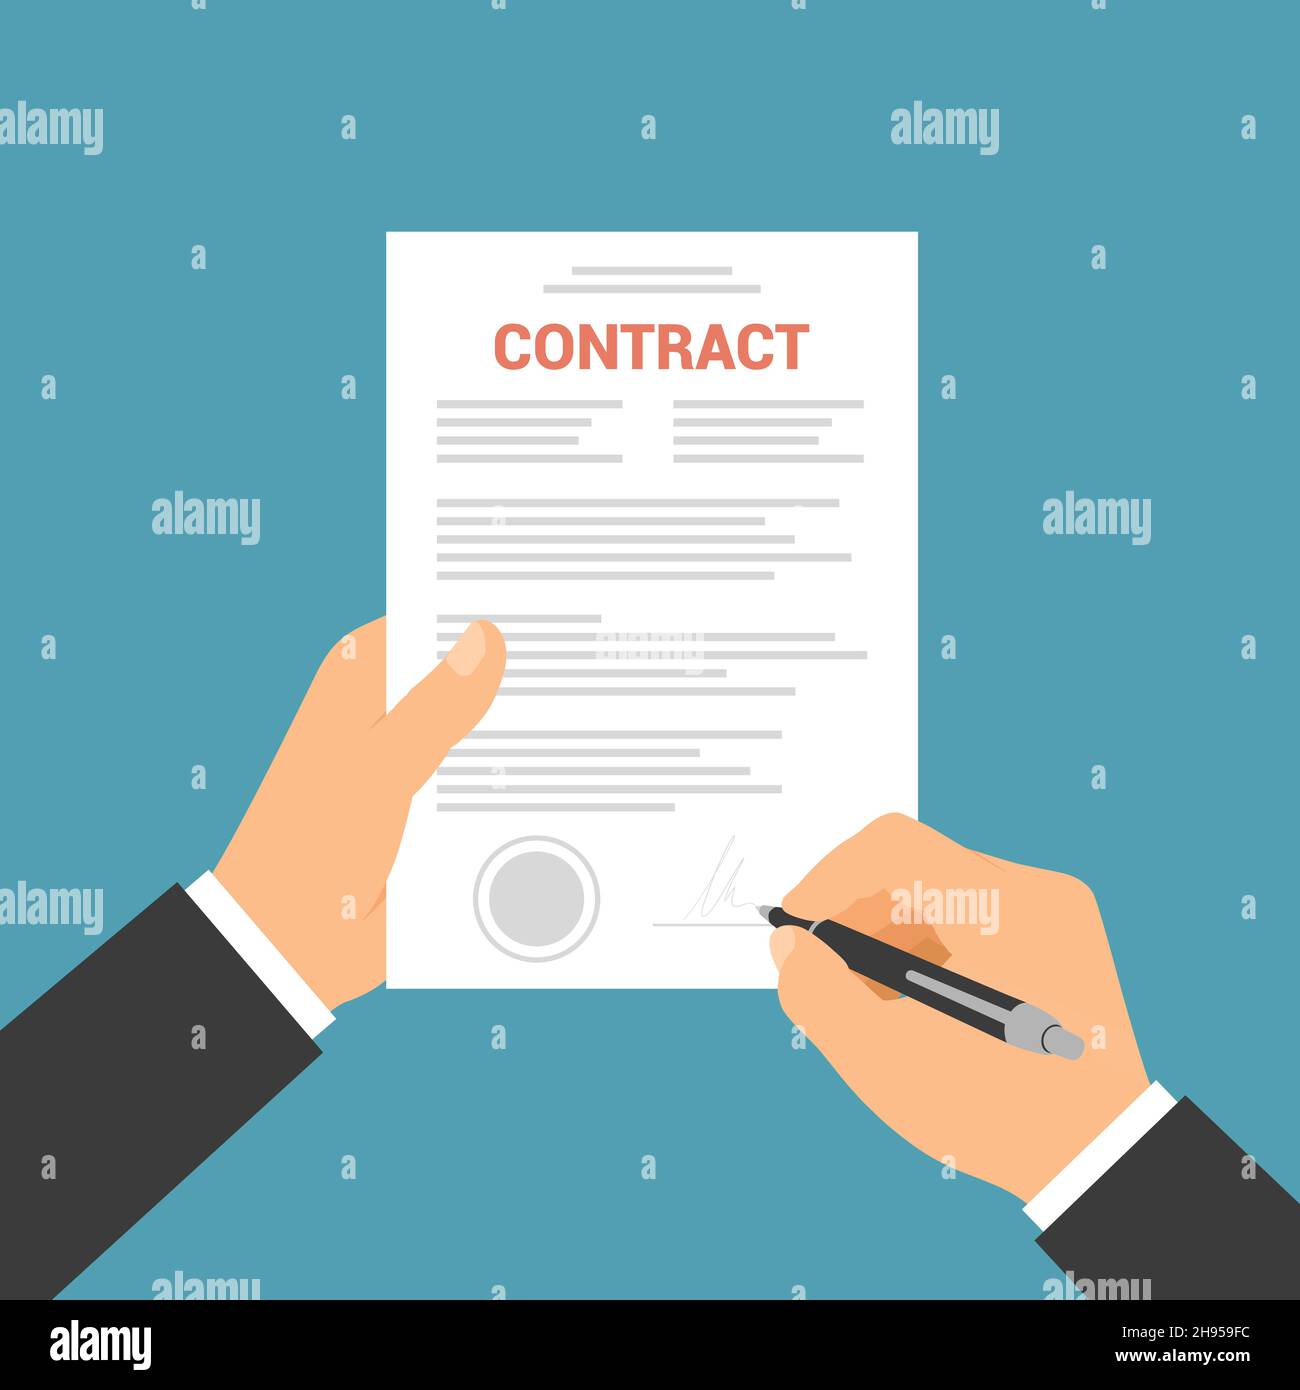 Flat design illustration of manager hand signing business contract with stamp - vector Stock Vector